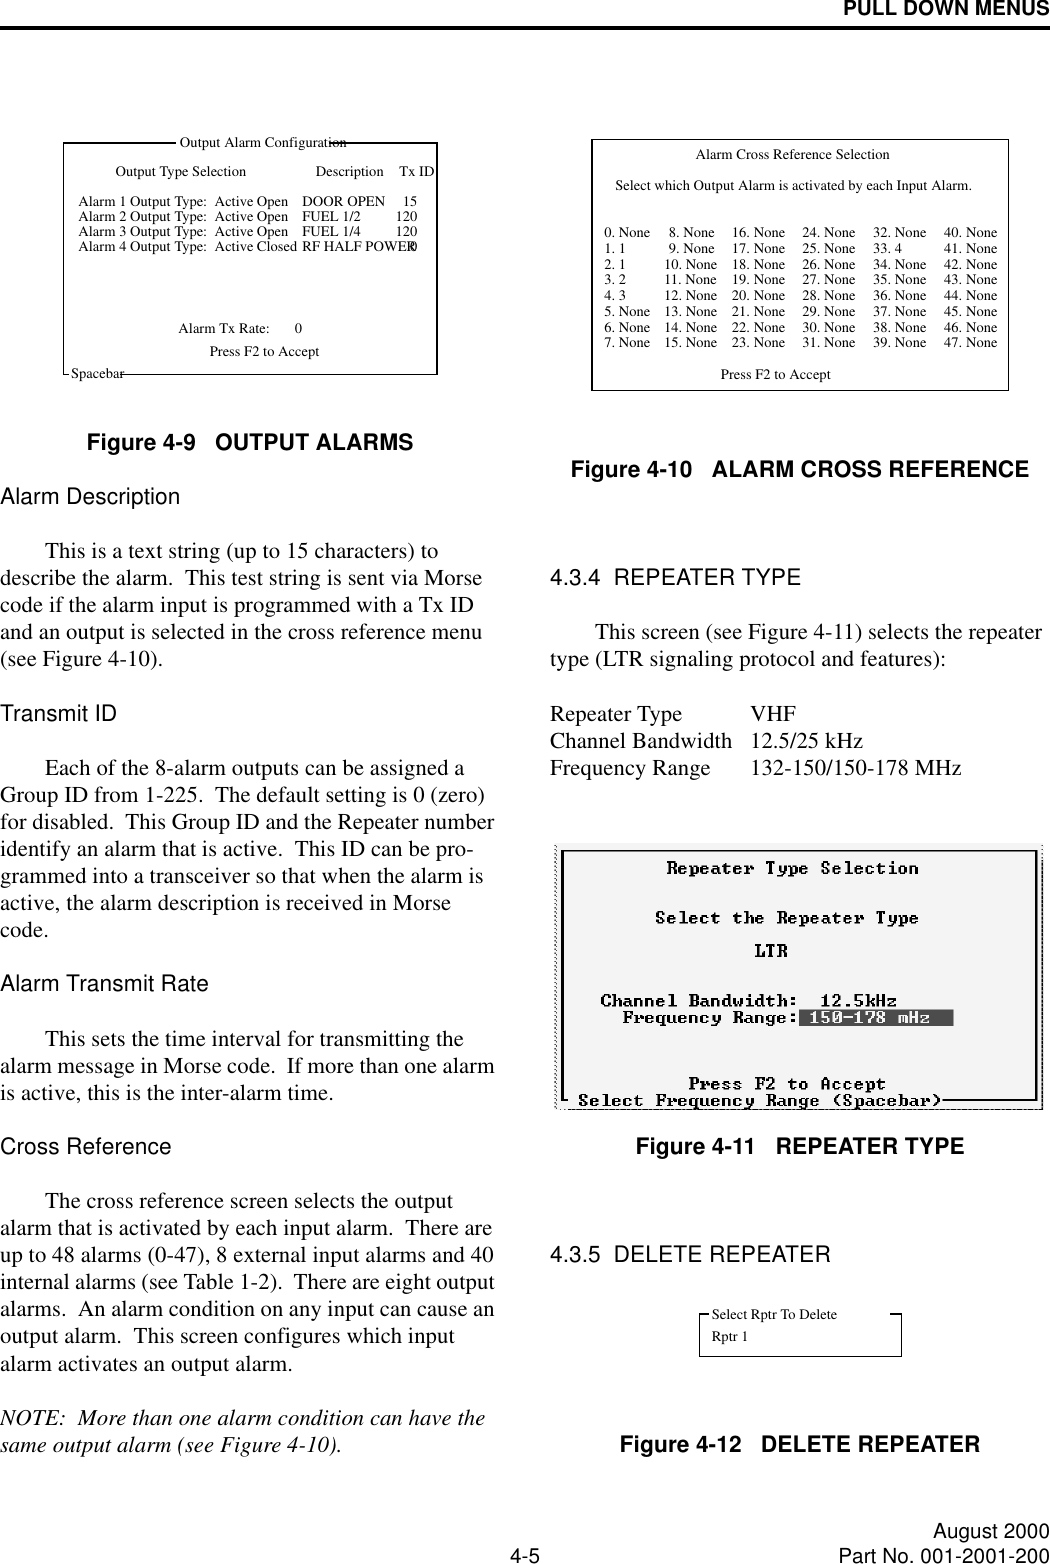 PULL DOWN MENUS4-5 August 2000Part No. 001-2001-200Figure 4-9   OUTPUT ALARMSAlarm DescriptionThis is a text string (up to 15 characters) to describe the alarm.  This test string is sent via Morse code if the alarm input is programmed with a Tx ID and an output is selected in the cross reference menu (see Figure 4-10).Transmit IDEach of the 8-alarm outputs can be assigned a Group ID from 1-225.  The default setting is 0 (zero) for disabled.  This Group ID and the Repeater number identify an alarm that is active.  This ID can be pro-grammed into a transceiver so that when the alarm is active, the alarm description is received in Morse code.  Alarm Transmit RateThis sets the time interval for transmitting the alarm message in Morse code.  If more than one alarm is active, this is the inter-alarm time.Cross ReferenceThe cross reference screen selects the output alarm that is activated by each input alarm.  There are up to 48 alarms (0-47), 8 external input alarms and 40 internal alarms (see Table 1-2).  There are eight output alarms.  An alarm condition on any input can cause an output alarm.  This screen configures which input alarm activates an output alarm.NOTE:  More than one alarm condition can have the same output alarm (see Figure 4-10).DescriptionSpacebarOutput Alarm ConfigurationOutput Type Selection Tx IDAlarm 1 Output Type:  Active OpenAlarm 2 Output Type:  Active OpenAlarm 3 Output Type:  Active OpenAlarm Tx Rate: 0Press F2 to AcceptDOOR OPENFUEL 1/2FUEL 1/4RF HALF POWERAlarm 4 Output Type:  Active Closed151201200Figure 4-10   ALARM CROSS REFERENCE4.3.4  REPEATER TYPEThis screen (see Figure 4-11) selects the repeater type (LTR signaling protocol and features): Repeater Type VHFChannel Bandwidth 12.5/25 kHzFrequency Range 132-150/150-178 MHzFigure 4-11   REPEATER TYPE4.3.5  DELETE REPEATERFigure 4-12   DELETE REPEATERSelect which Output Alarm is activated by each Input Alarm.8. None 24. None 32. None 40. None5. None6. None7. None9. None10. None11. None12. None13. None14. None15. None17. None18. None19. None20. None21. None22. None23. None25. None26. None27. None28. None29. None30. None31. None34. None35. None36. None37. None38. None39. None41. None42. None43. None44. None45. None46. None47. NoneAlarm Cross Reference SelectionPress F2 to Accept0. None1. 12. 13. 24. 316. None 33. 4Select Rptr To DeleteRptr 1